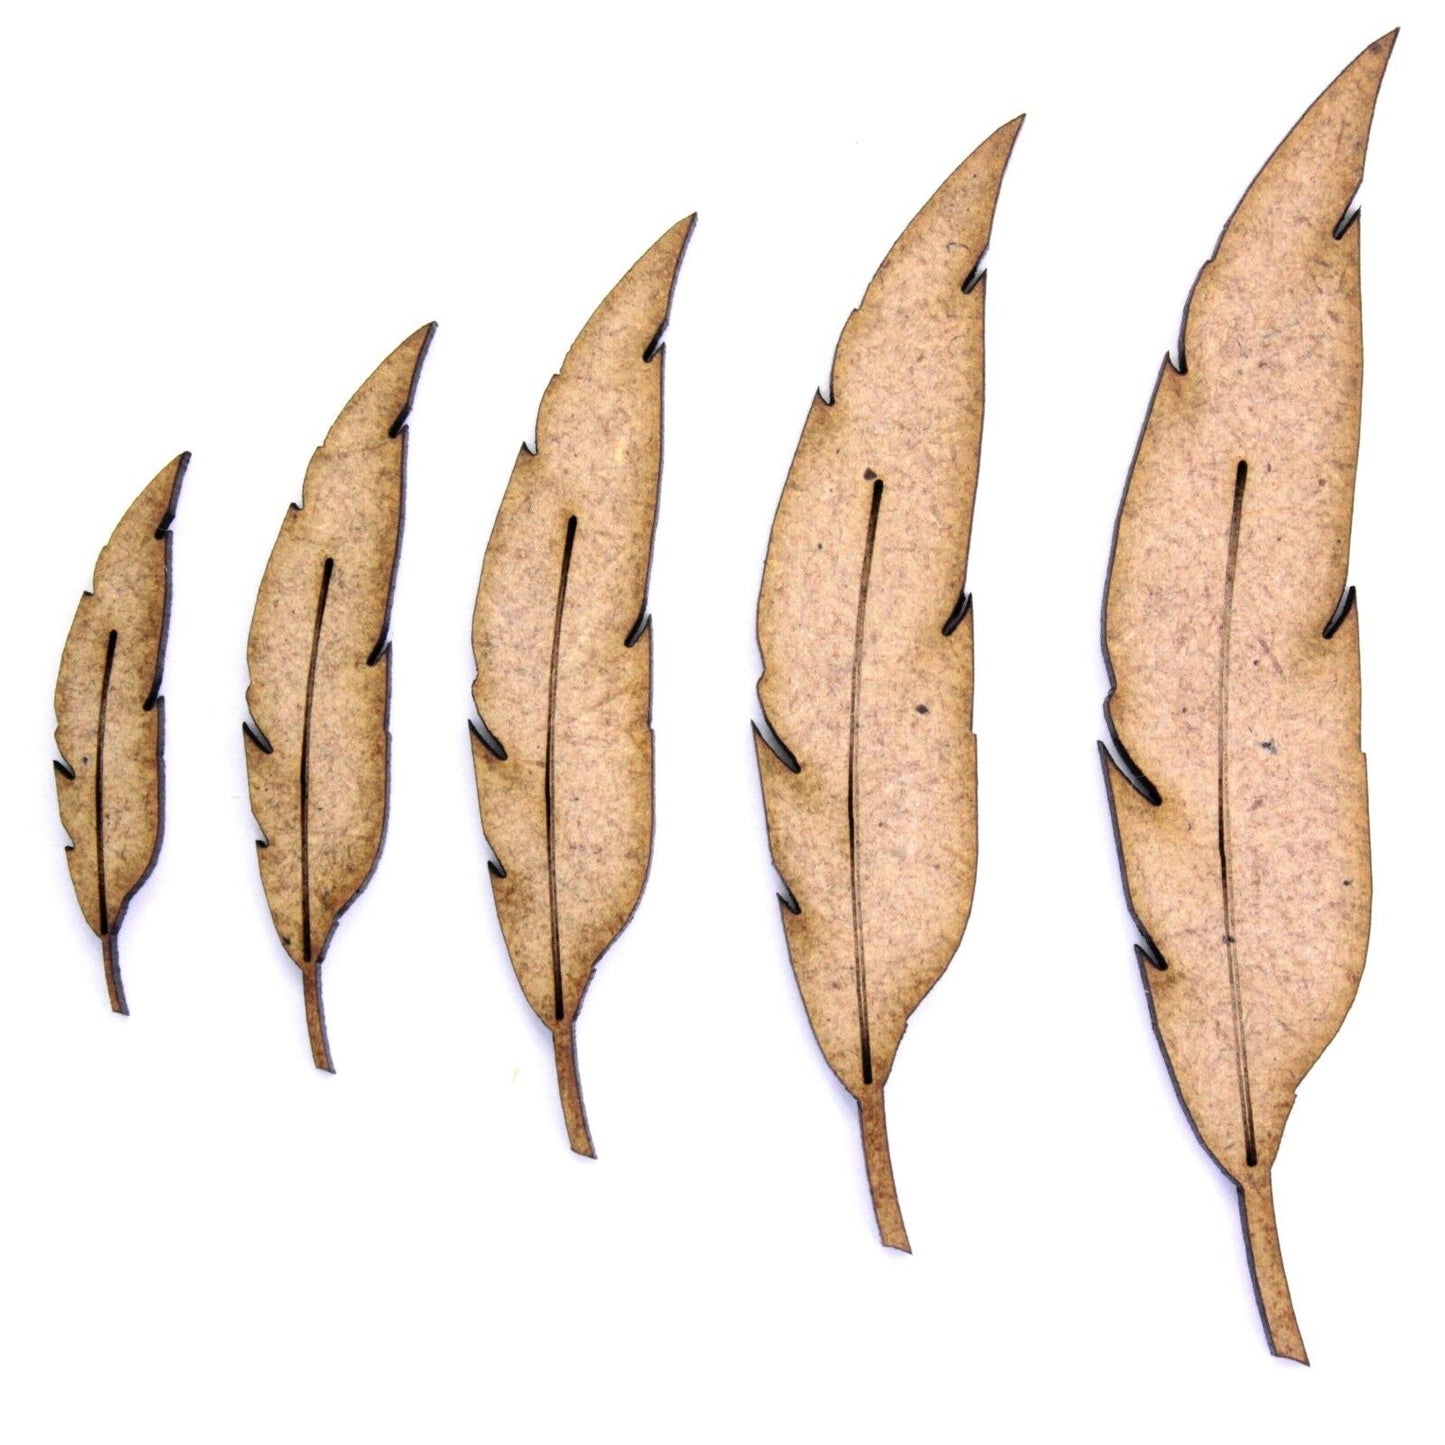 Feather Craft Shape, Various Sizes, 2mm MDF Wood. Bird, Quill. Mixed Media Art